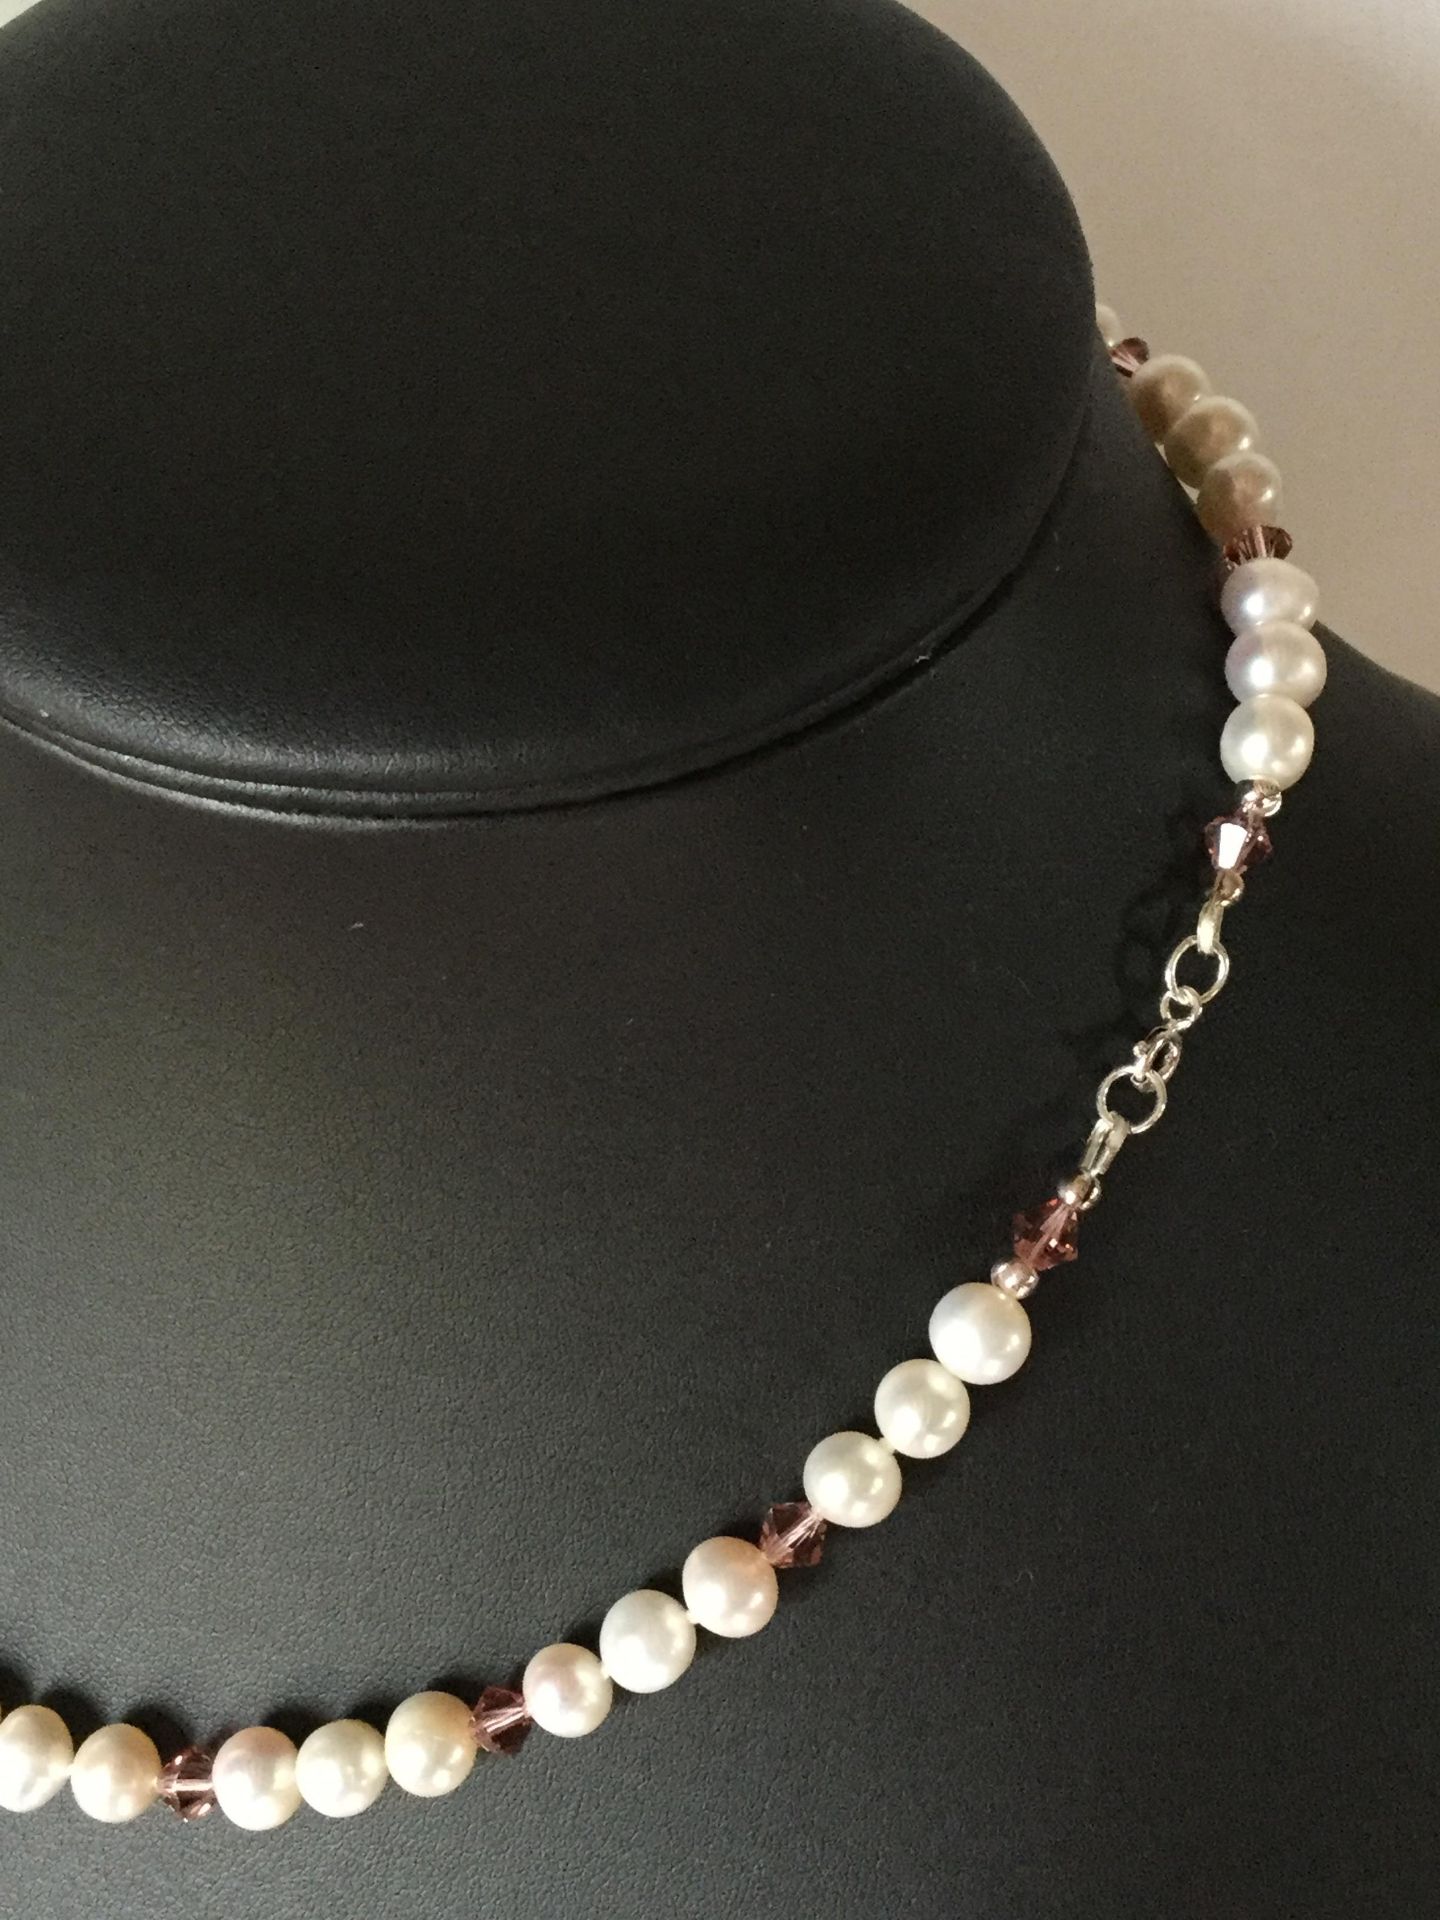 Freshwater Cultured Pearl with Vintage Rose Swarovski éléments necklace 925 silver clasp - Image 2 of 8